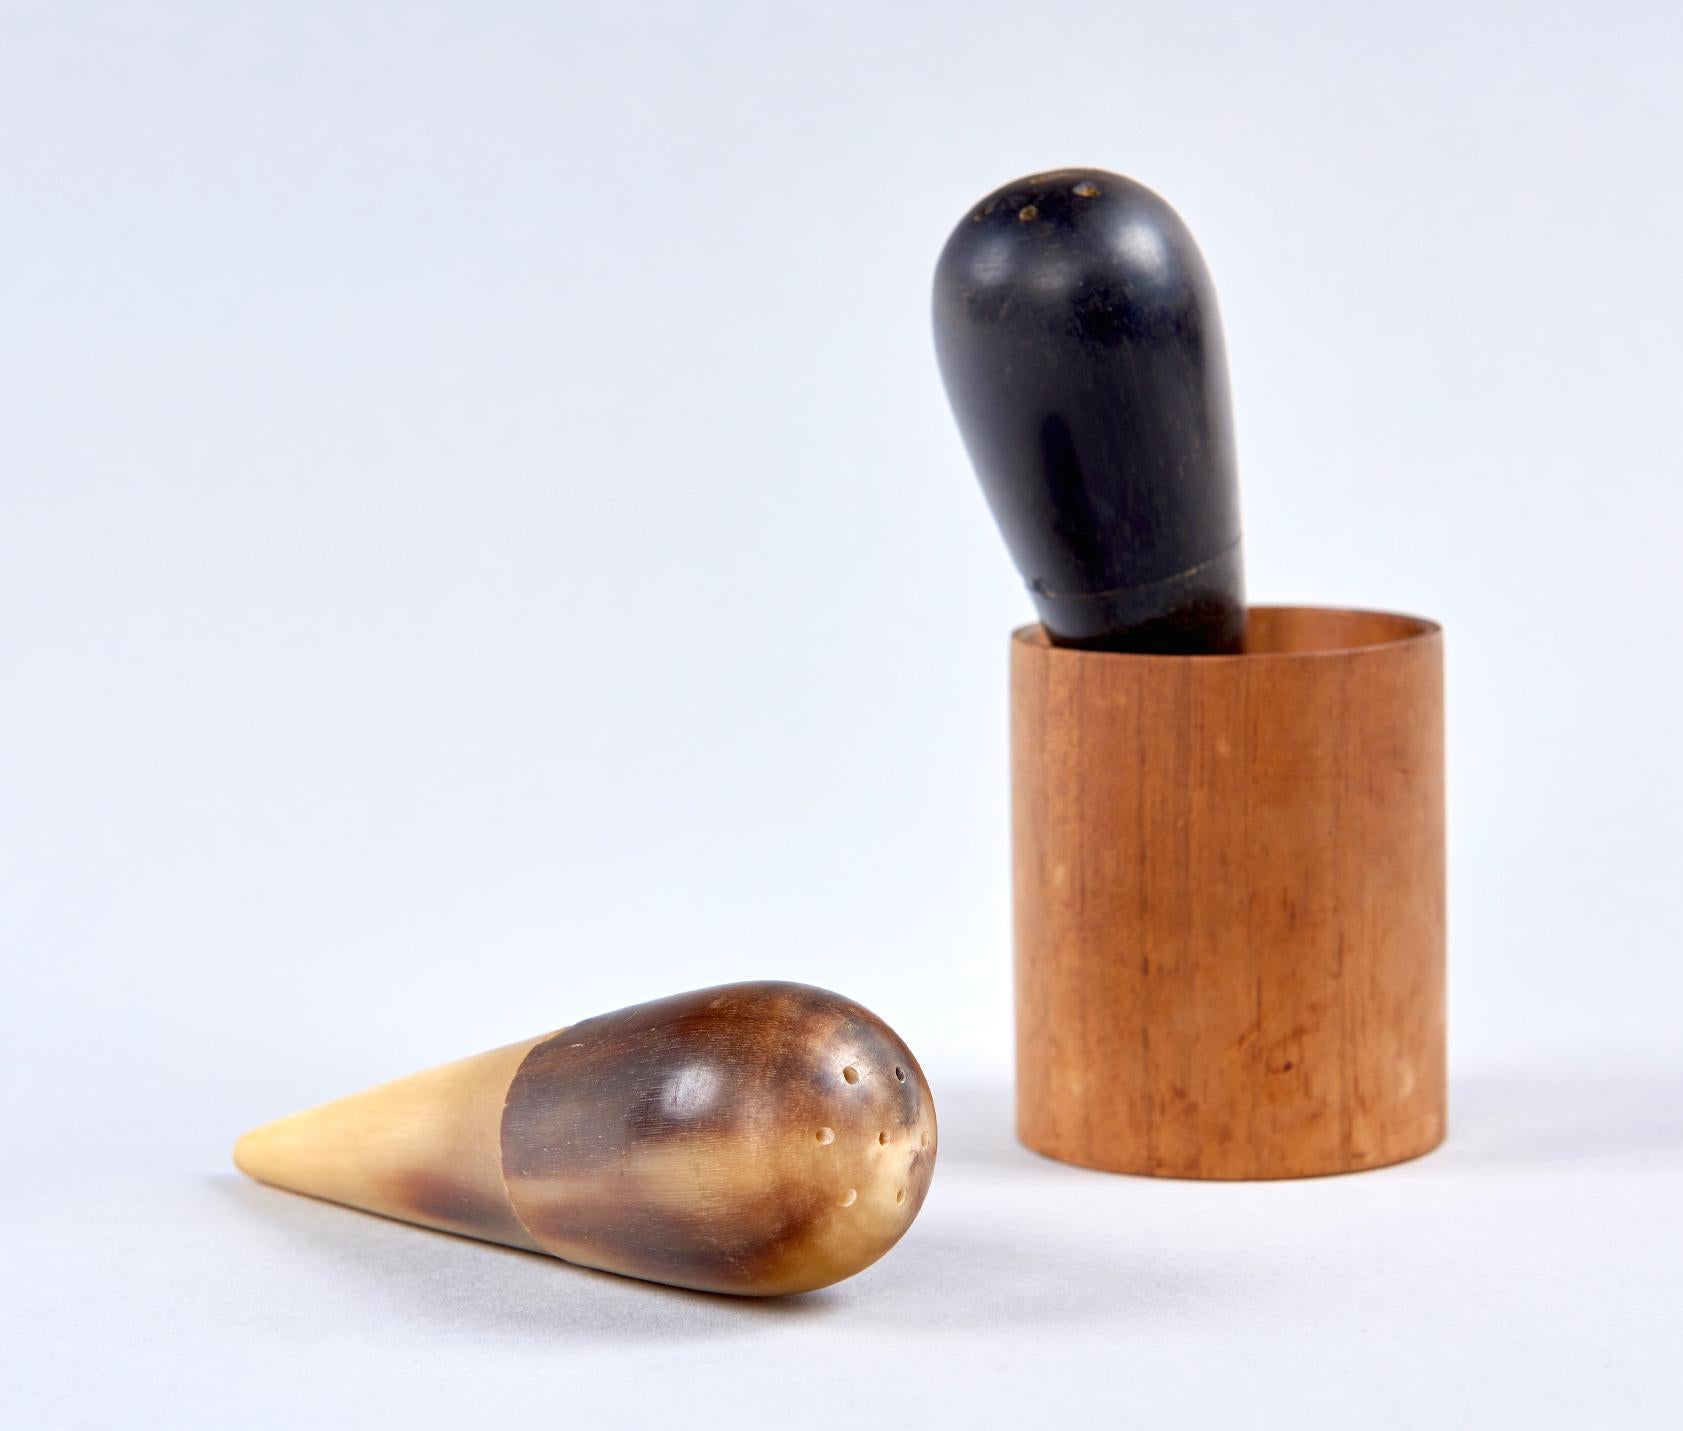 Two shakers, carved from horn, rest in a special turned walnut holder. A very playful way to supply condiments to your guests.

The shakers which are shaped like inverted drops, and feel very good in the hand are each made of two parts, which